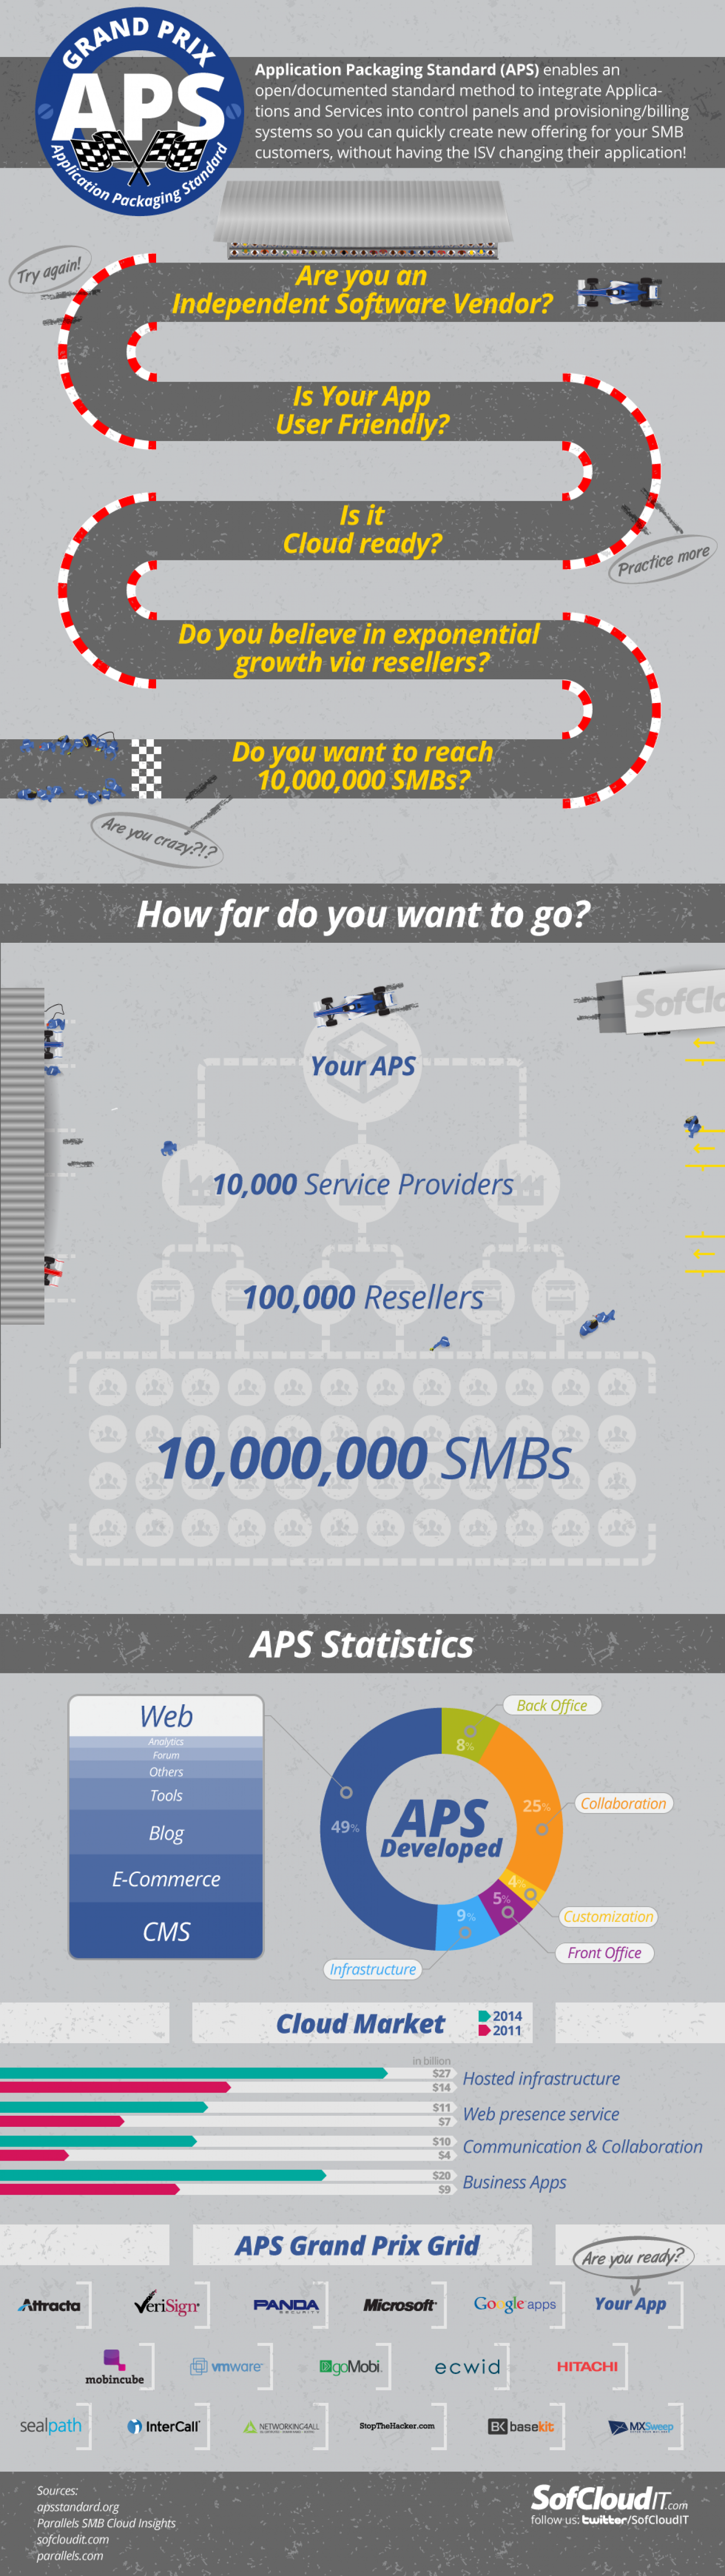 Application Packaging Standard Grand Prix Infographic